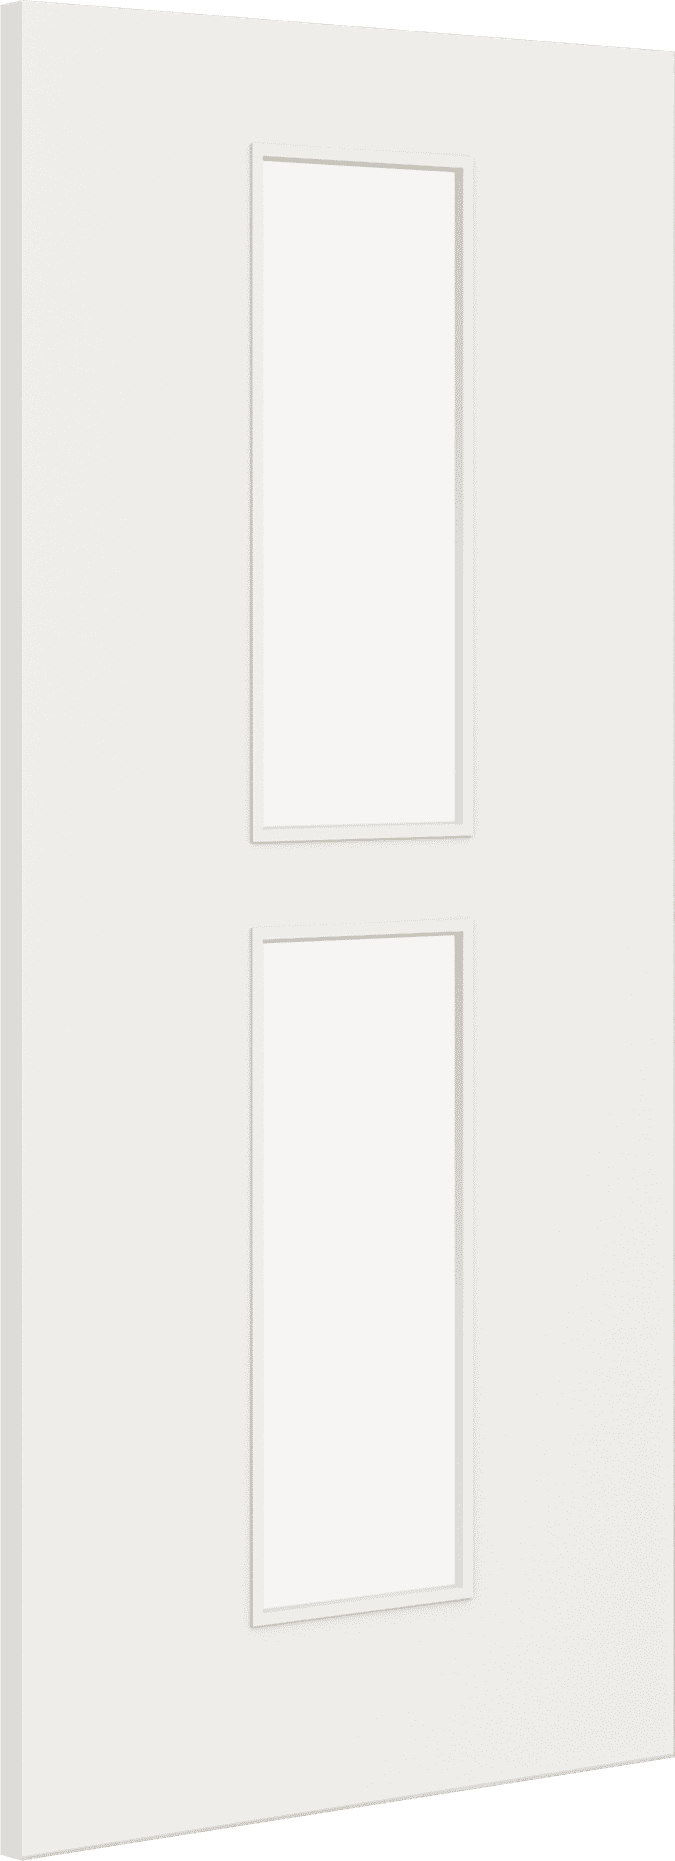 1981mm x 838mm x 44mm (33") Architectural Paint Grade White 12 Clear Glazed Fire Door Blank